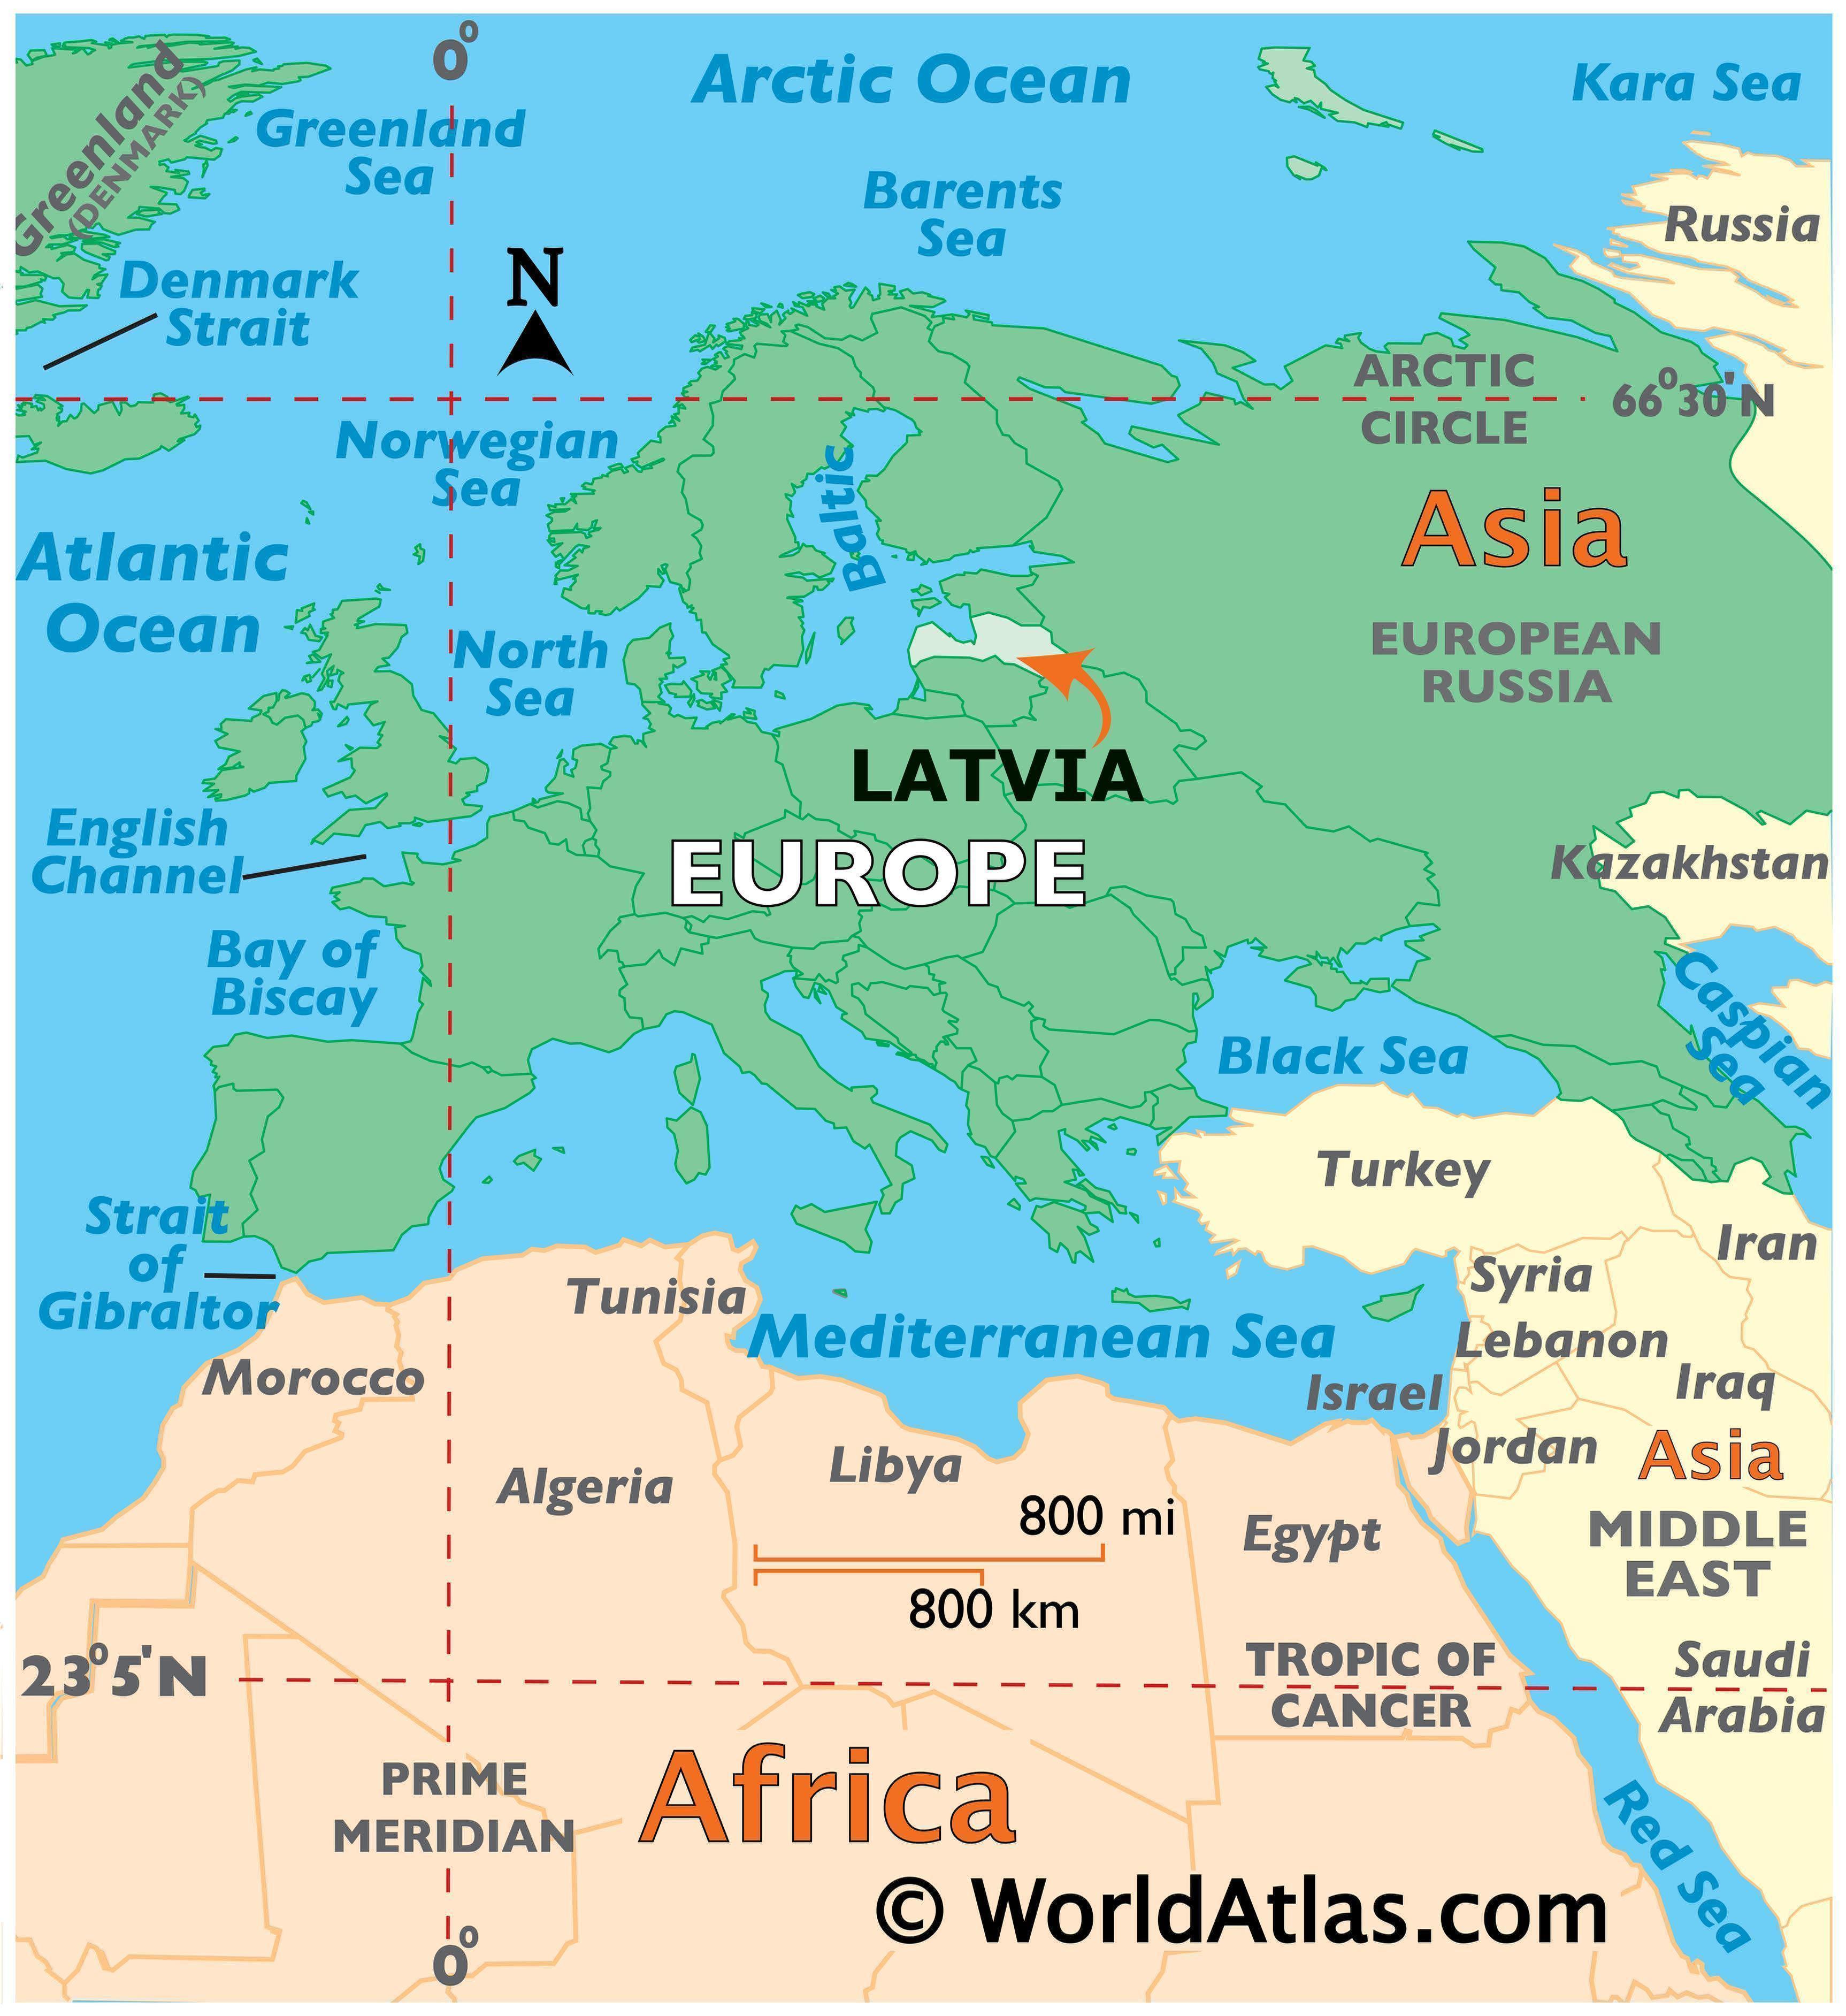 where is latvia located on the world map Latvia Map Geography Of Latvia Map Of Latvia Worldatlas Com where is latvia located on the world map